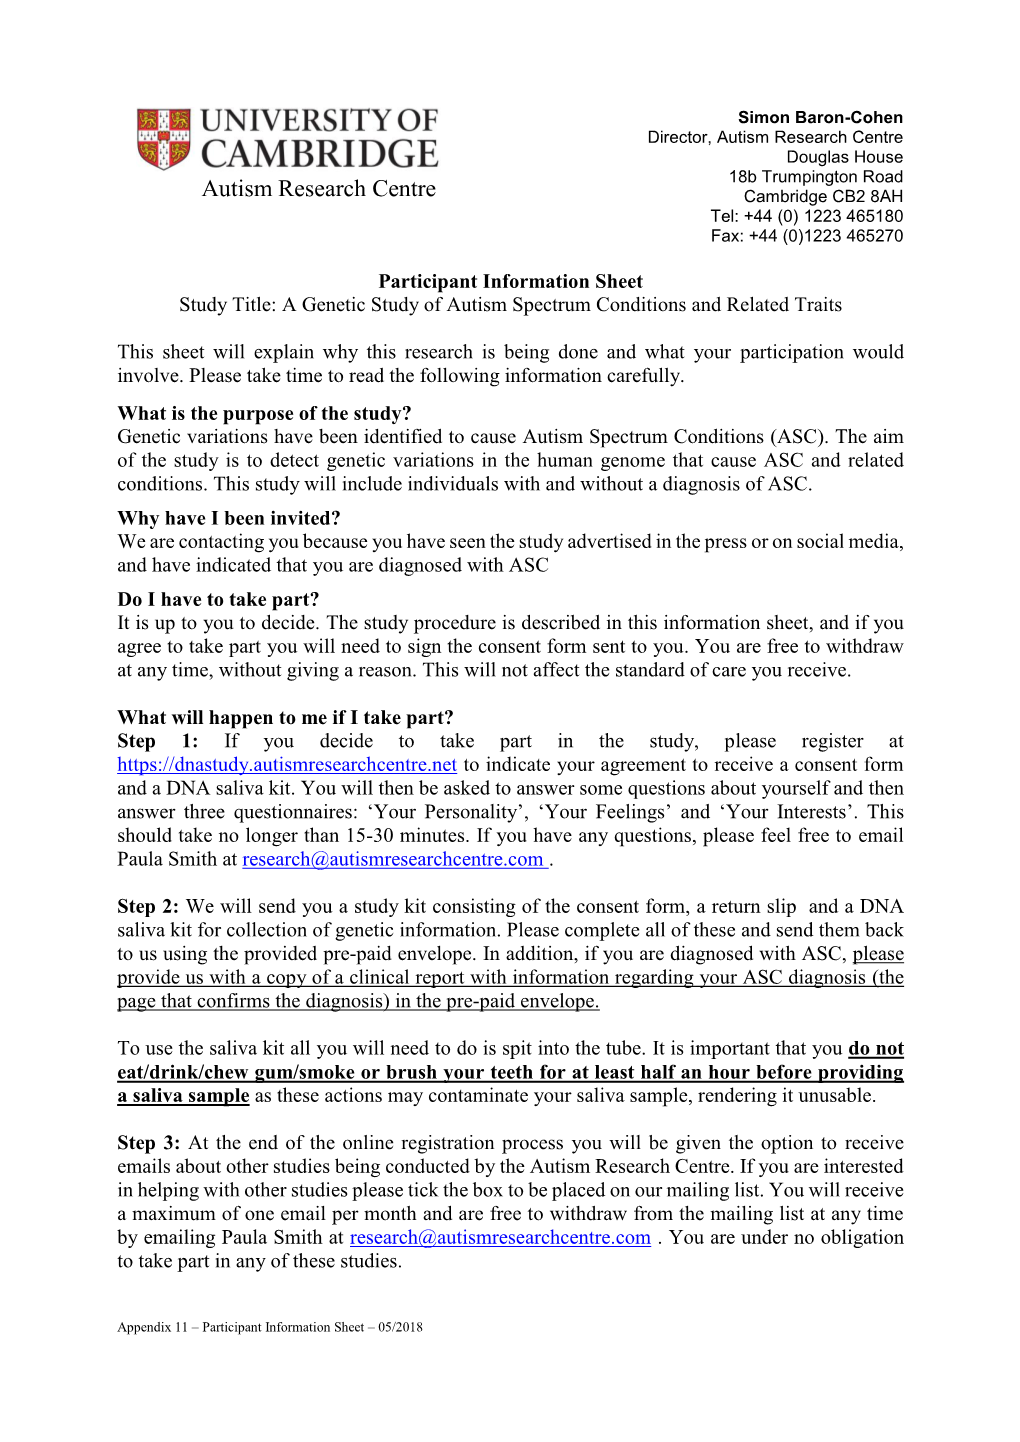 Participant Information Sheet Study Title: a Genetic Study of Autism Spectrum Conditions and Related Traits